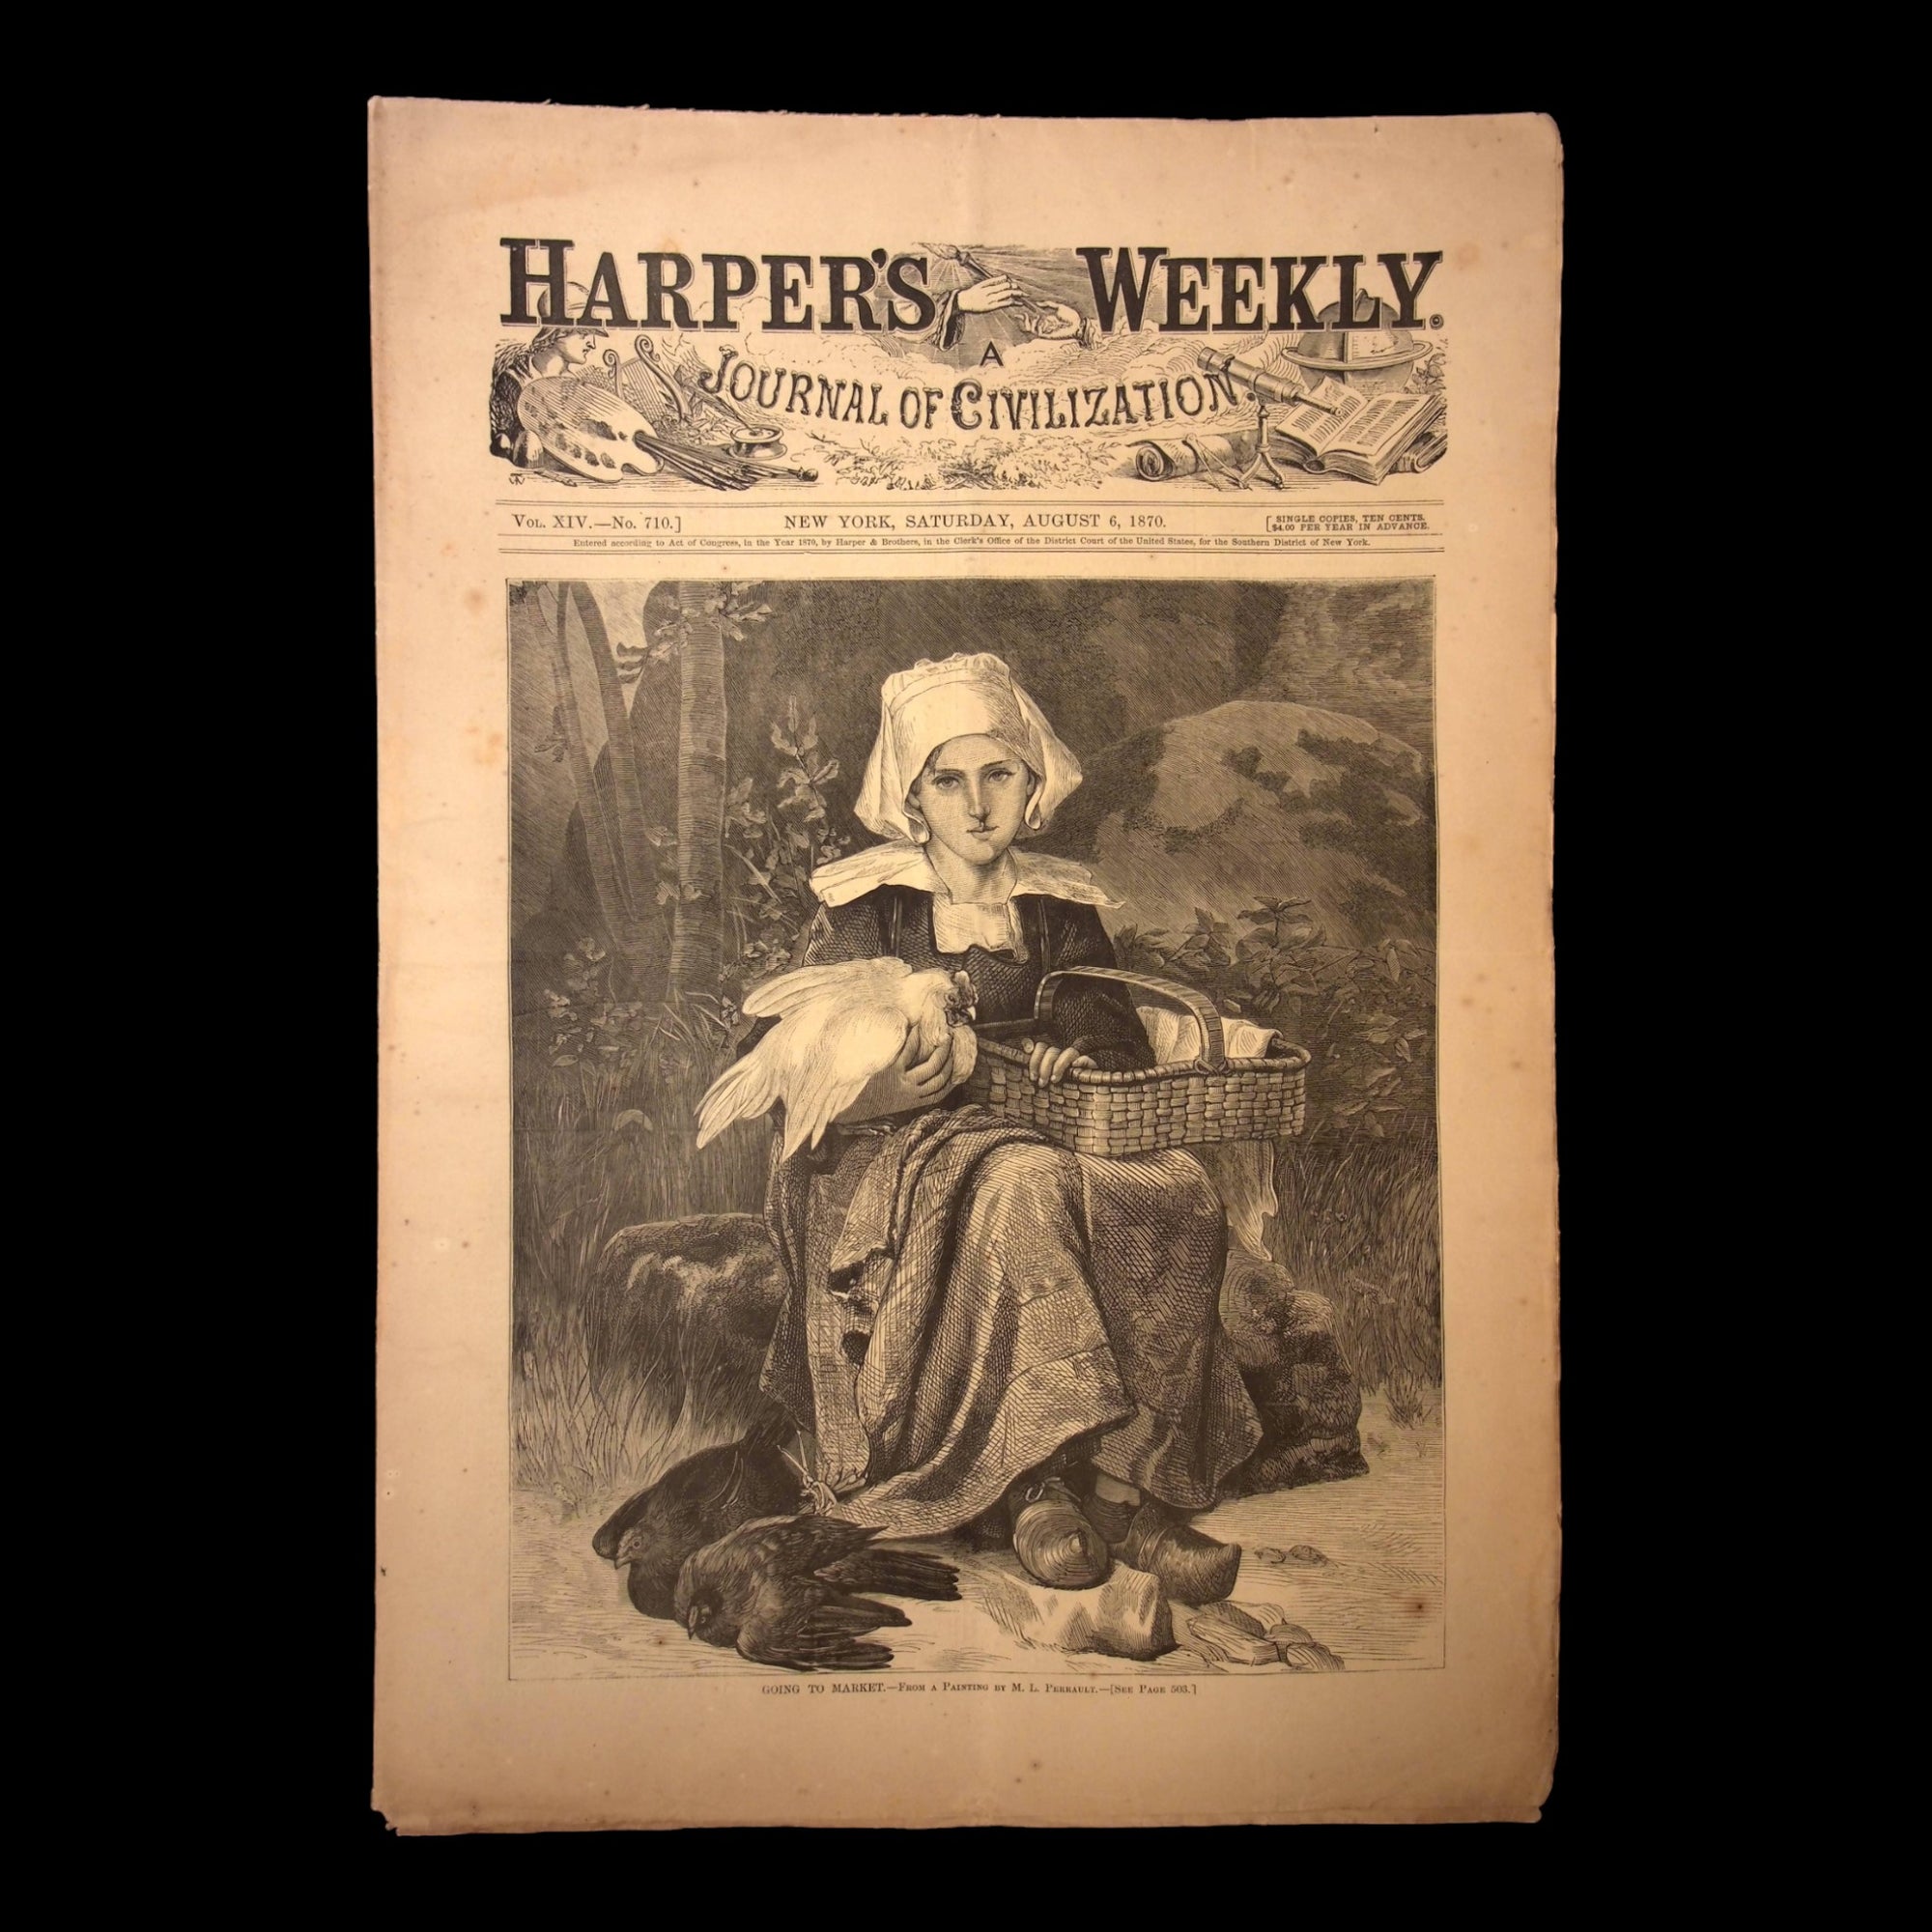 Harper's Weekly: "Going to Market," Franco–Prussian War, Archery & Rifles — Aug. 6th, 1870